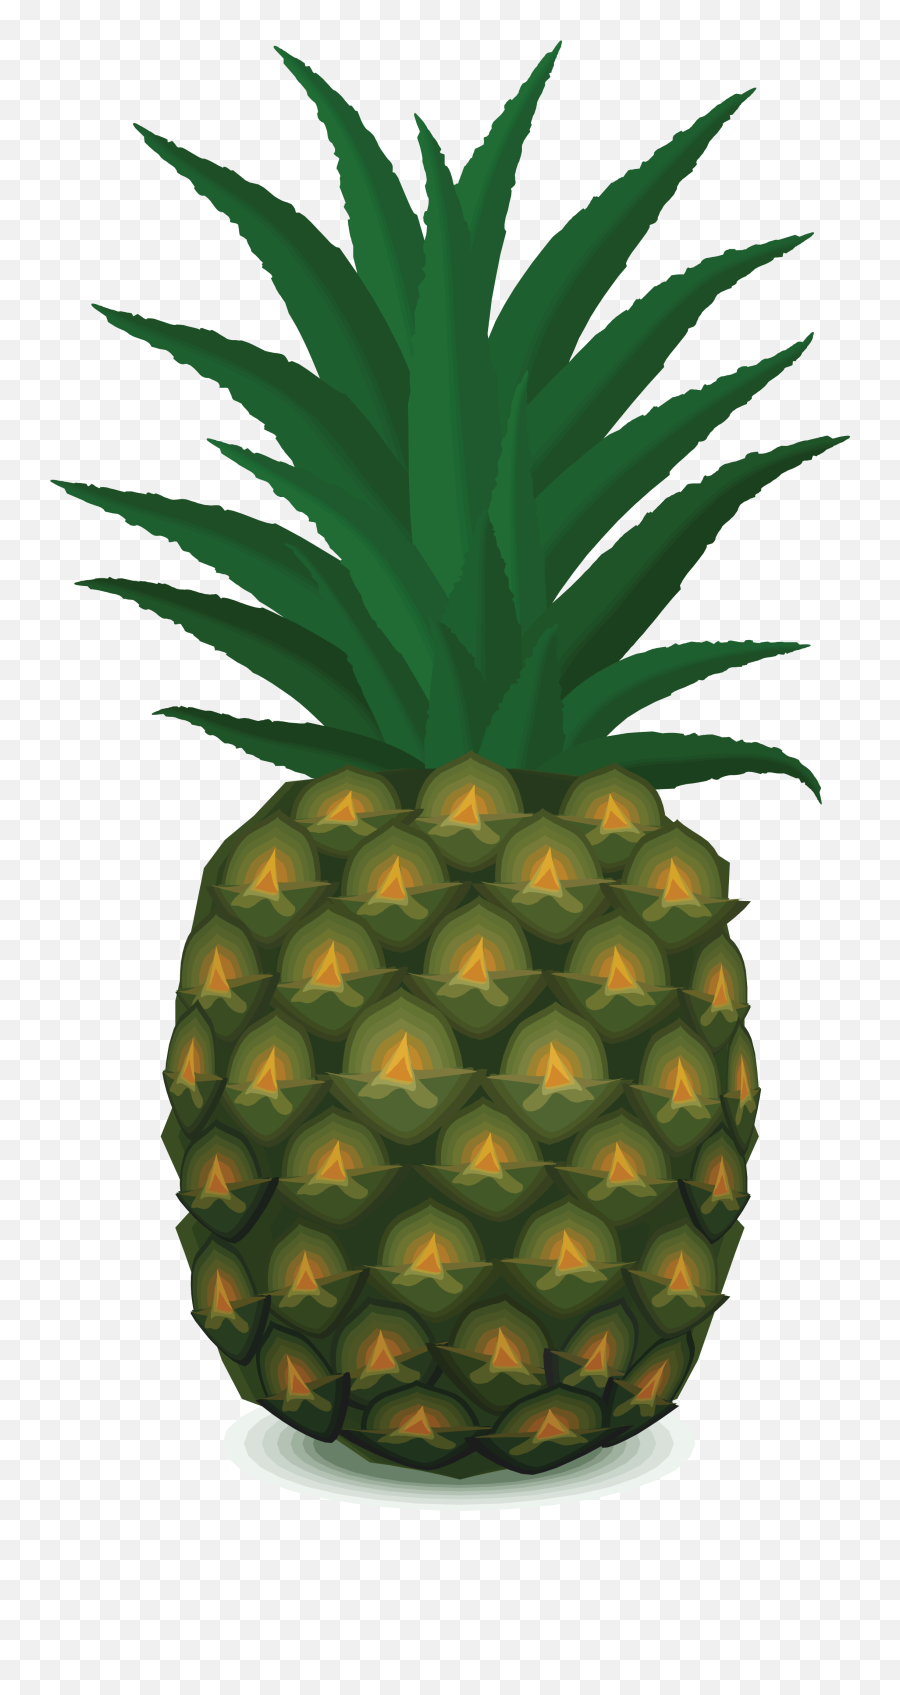 Download Pineapple Png Image - Pineapple Vector,Pineapples Png